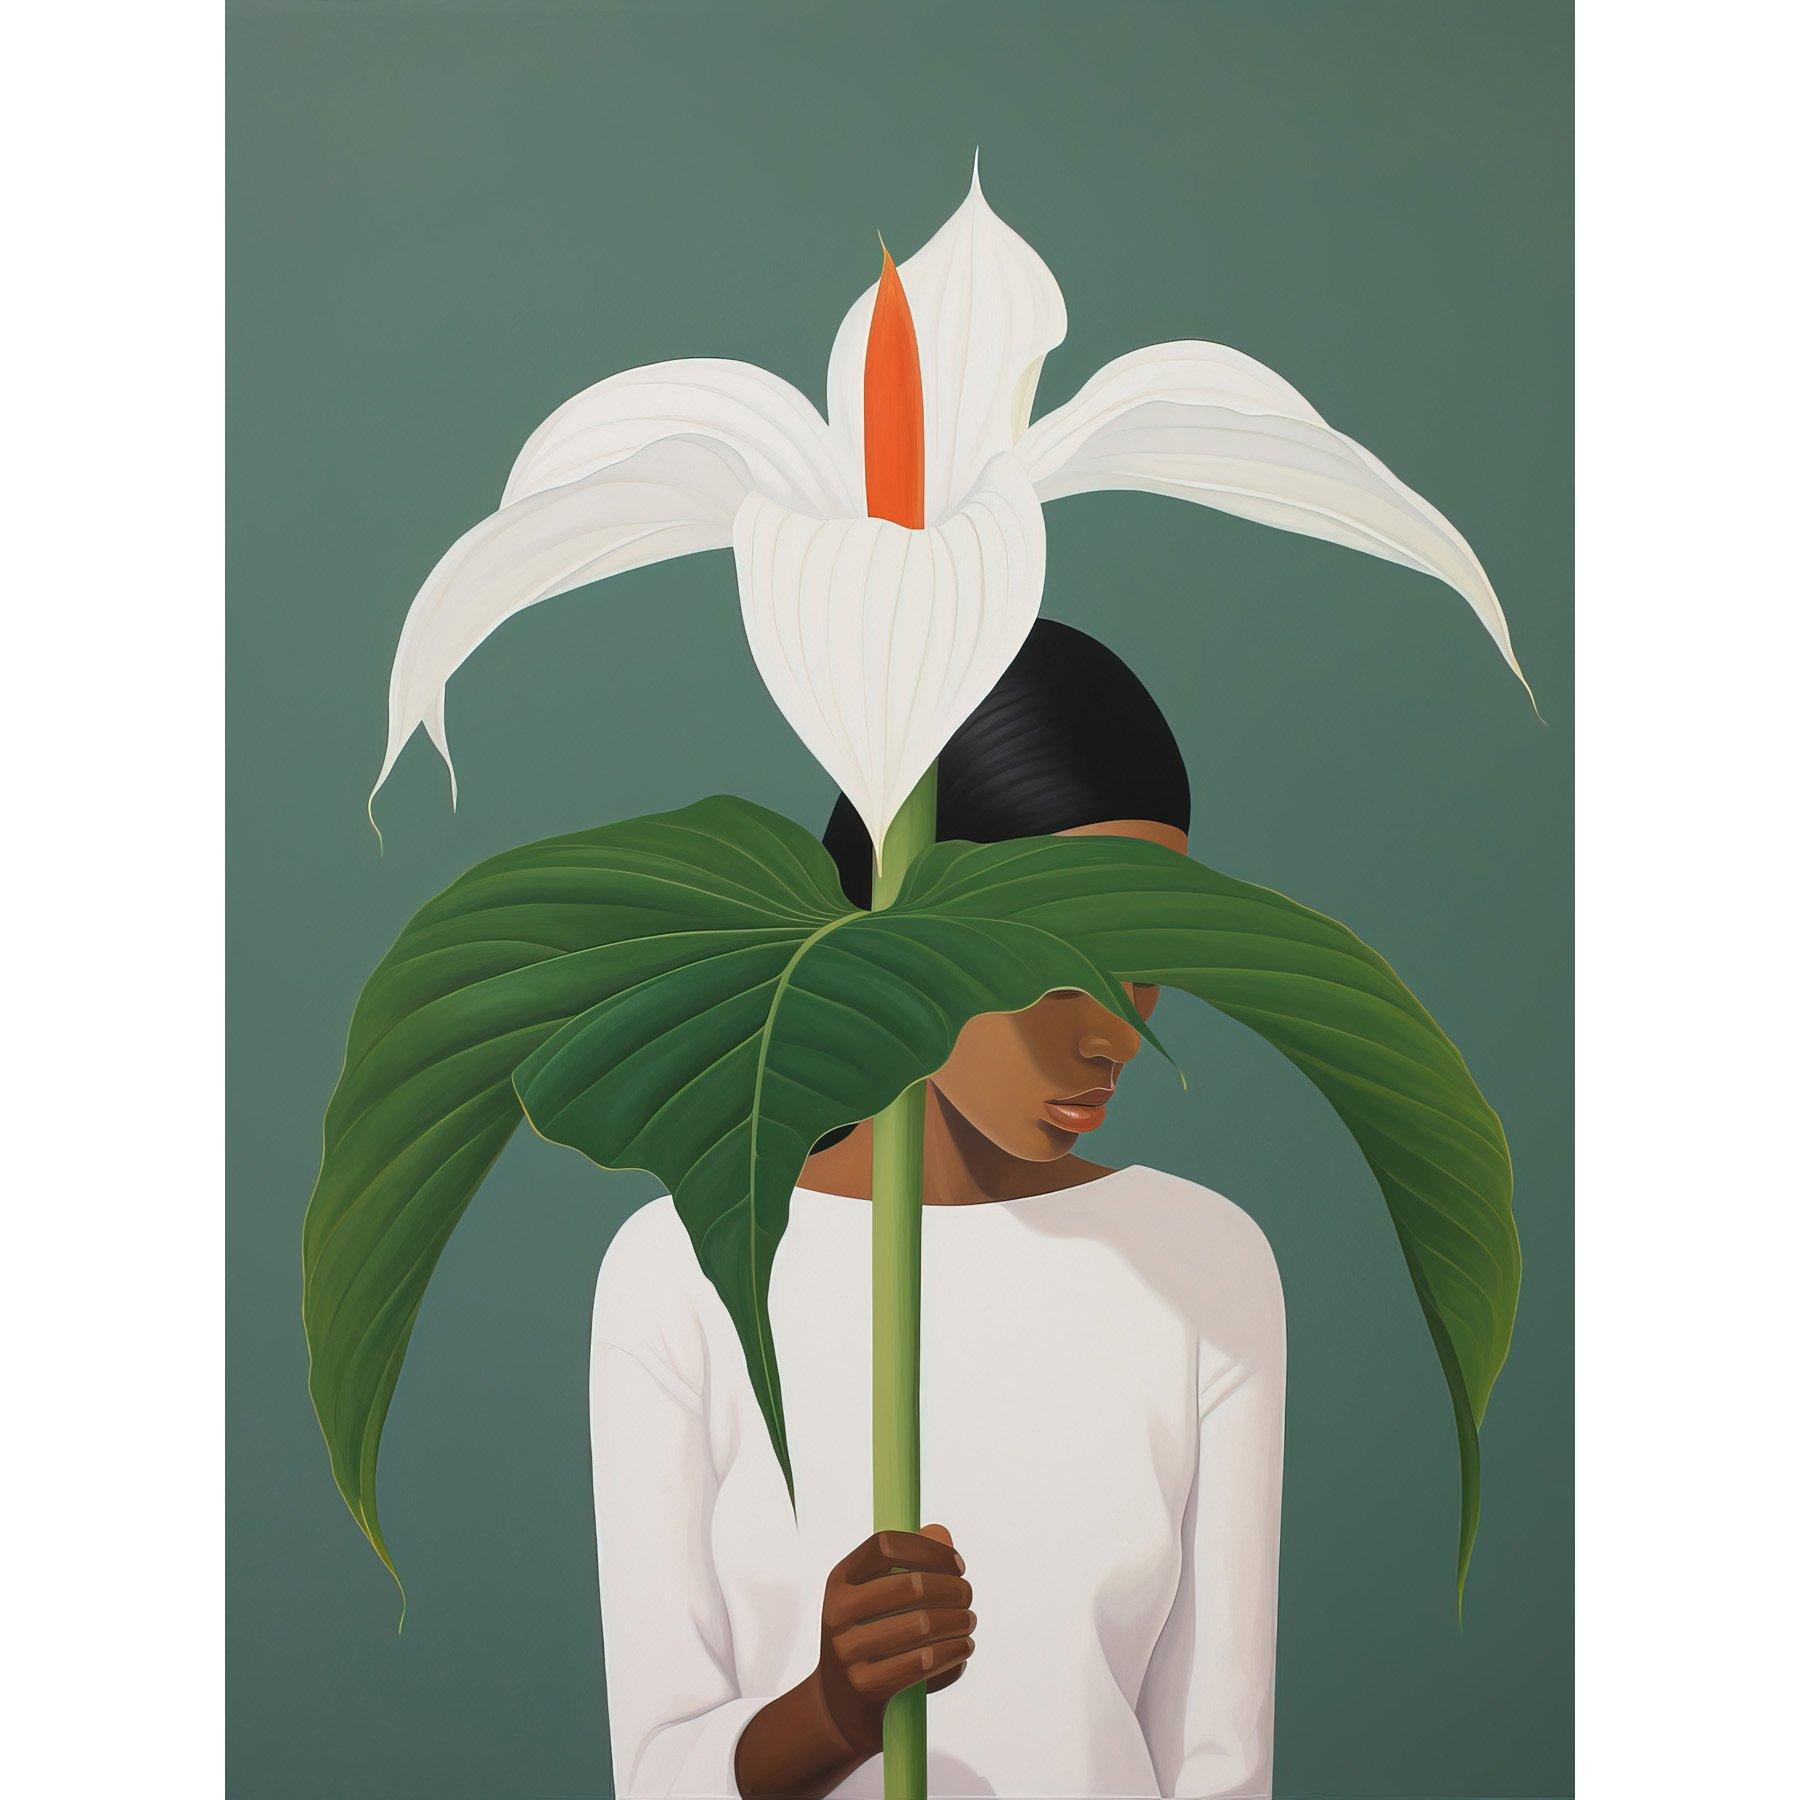 Wall Art Print Giant Peace Lily Showcase Realistic Oil Painting White Teal Green Woman with Flower Minimalist Artwork Poster - image 1